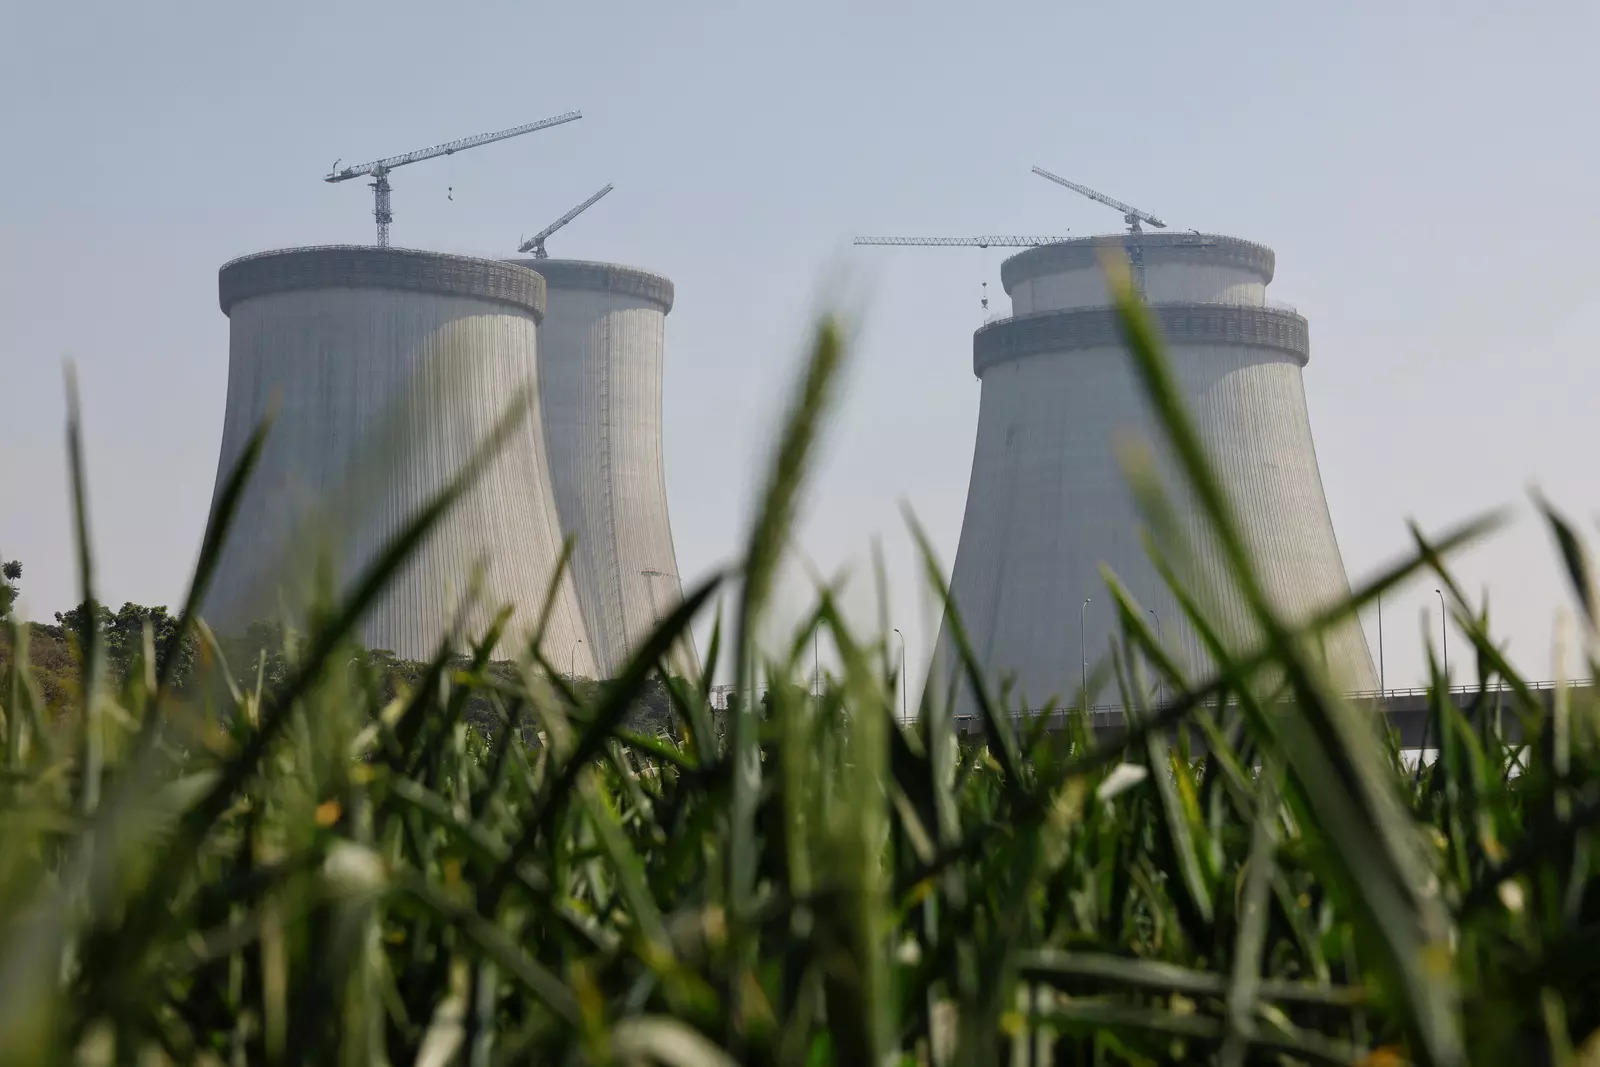  There has been renewed focus globally on nuclear energy after the Ukraine war resulted a fossil fuel crisis.